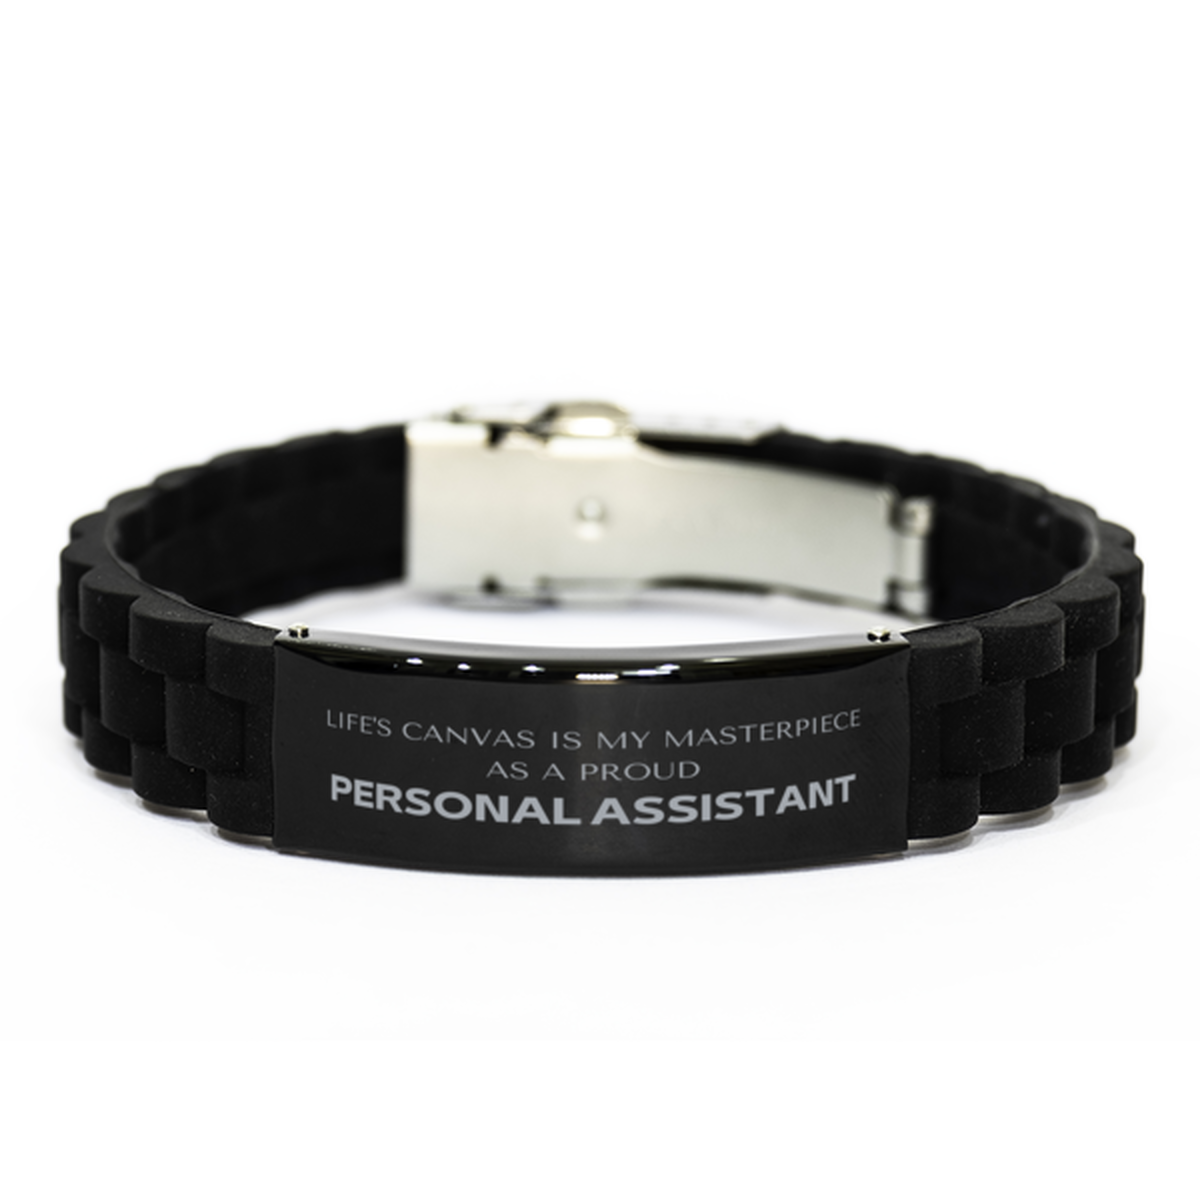 Proud Personal Assistant Gifts, Life's canvas is my masterpiece, Epic Birthday Christmas Unique Black Glidelock Clasp Bracelet For Personal Assistant, Coworkers, Men, Women, Friends